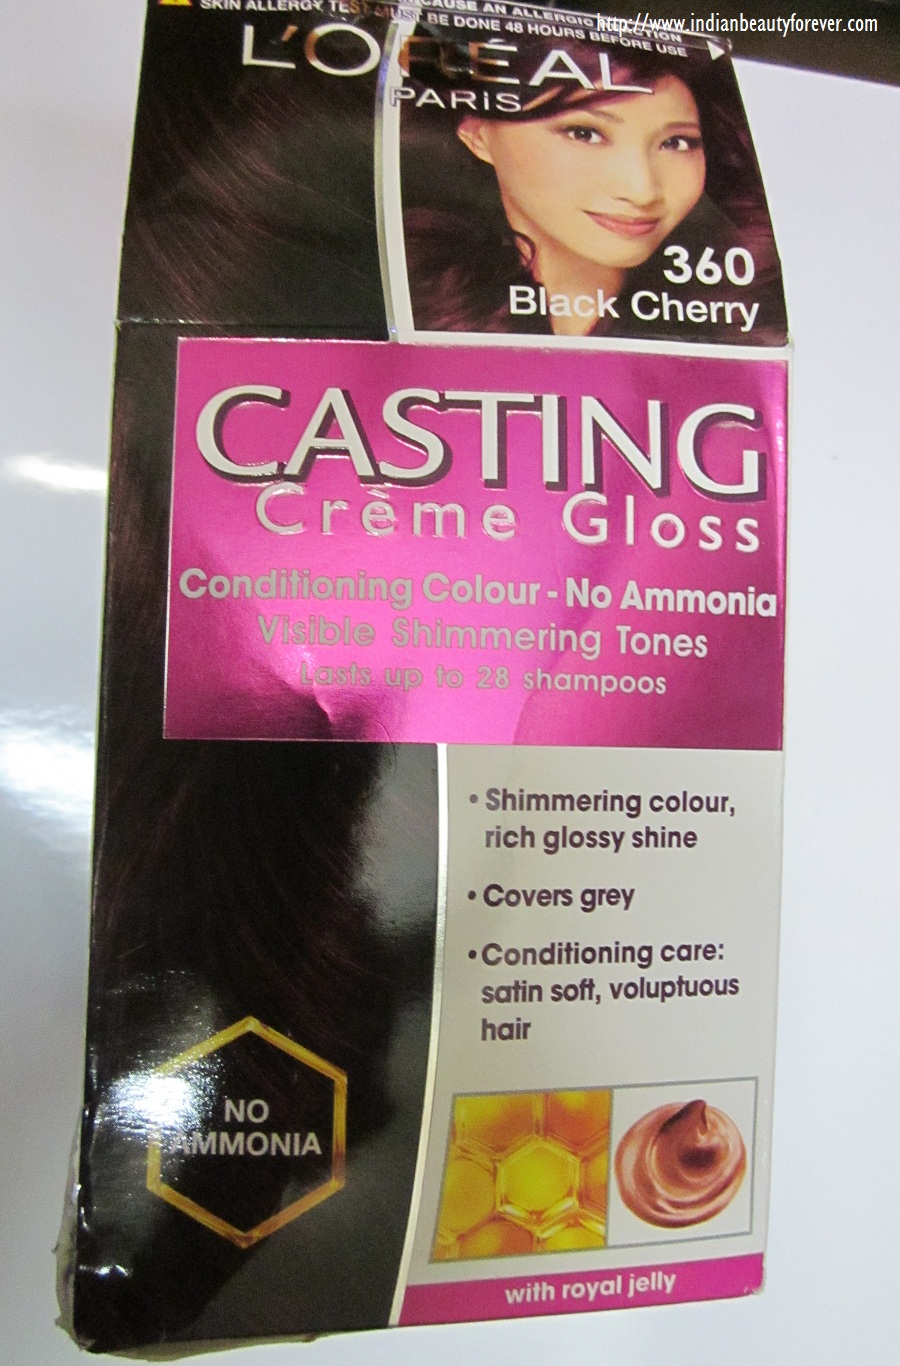 L'Oreal Paris Casting Creme Gloss in Black Cherry 360-Review and HOTD -  Indian Beauty Forever